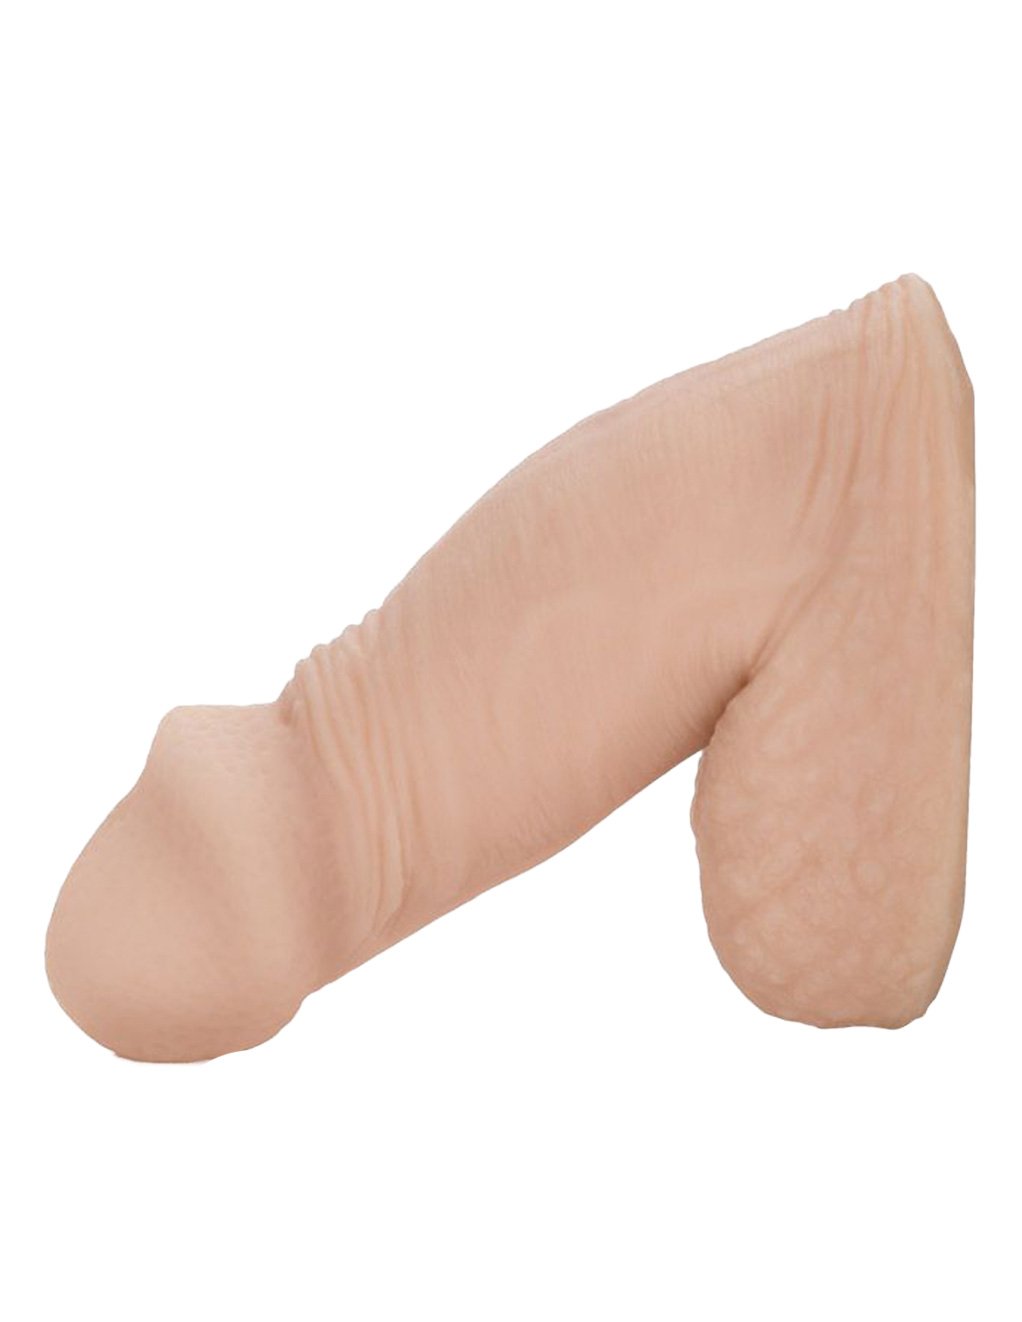 Packer Gear 4 Inch Packing Penis- Ivory- Side view